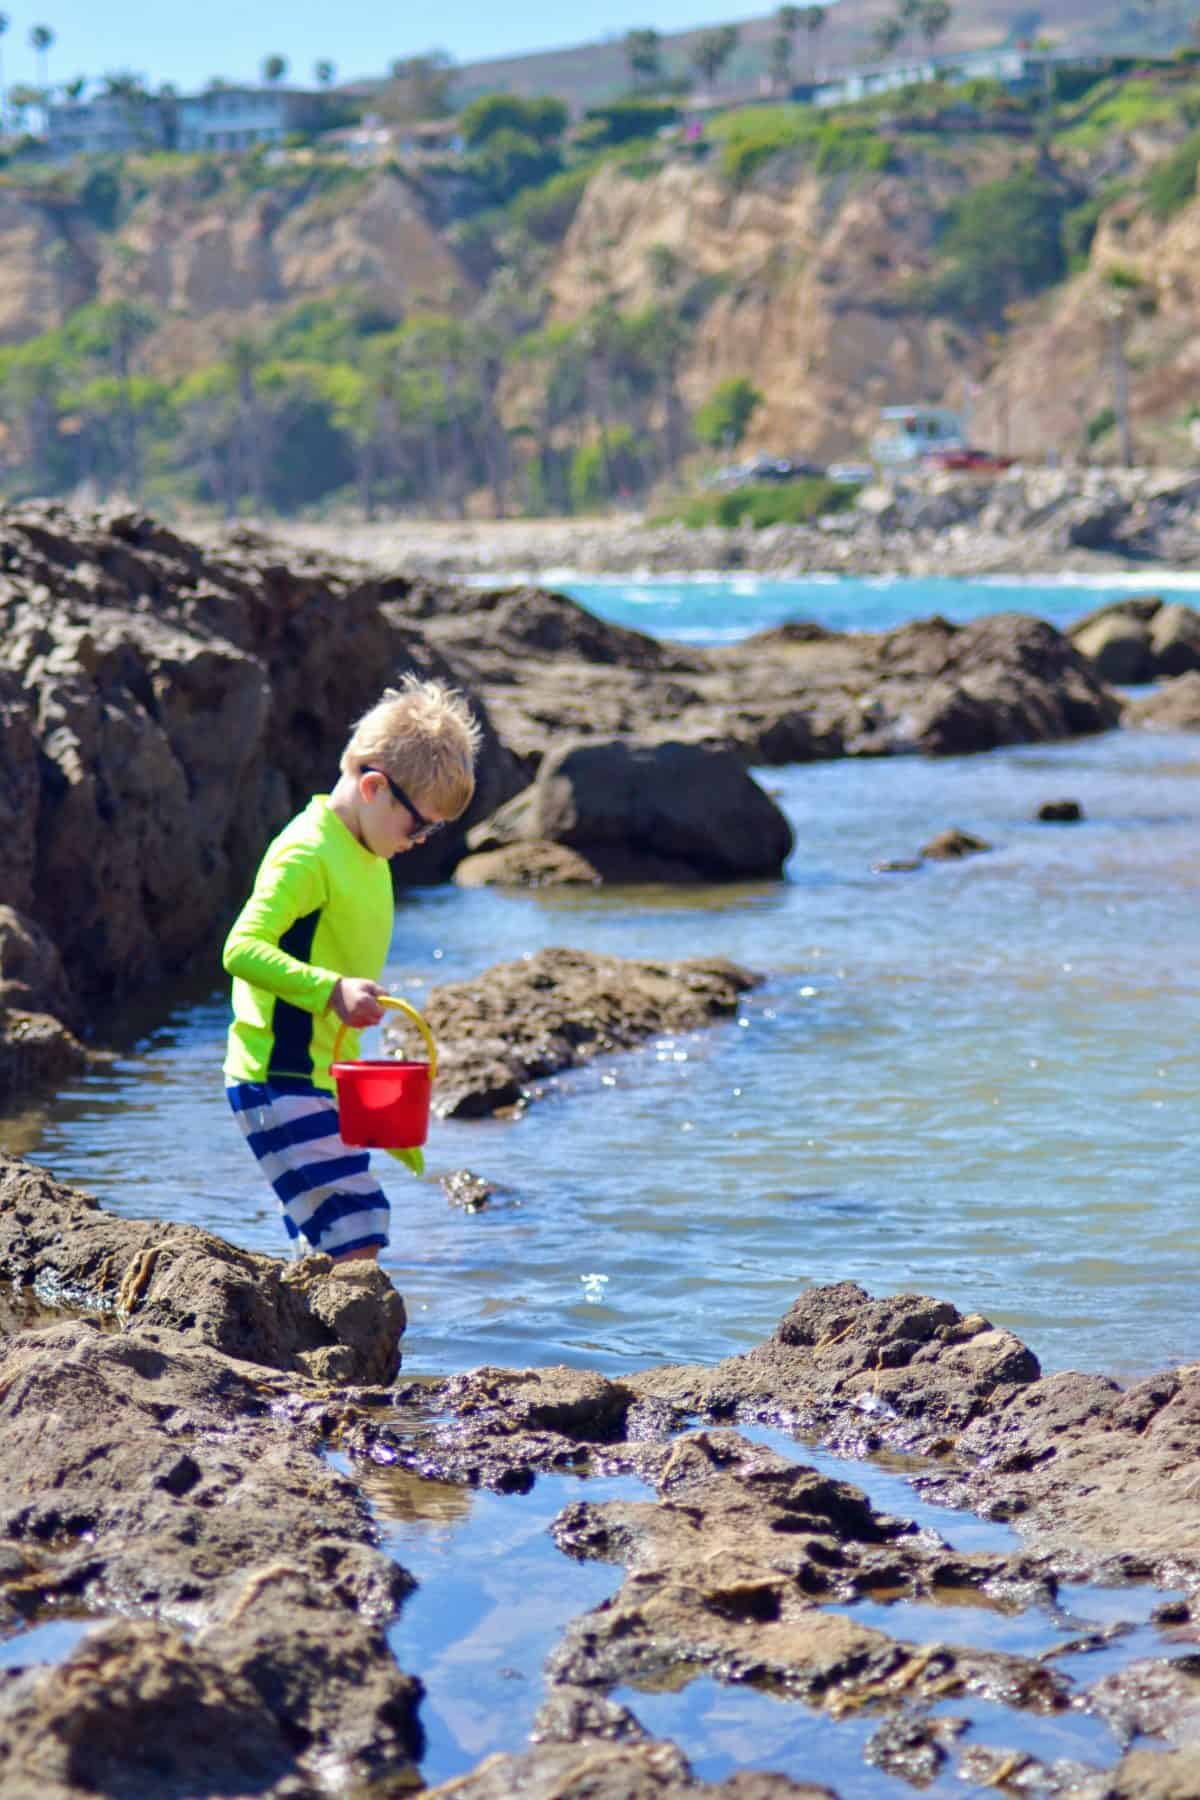 If you want to know how to tour tide pools with kids in Los Angeles, here’s a little advice to ensure your next visit is educational, respectful and fun!